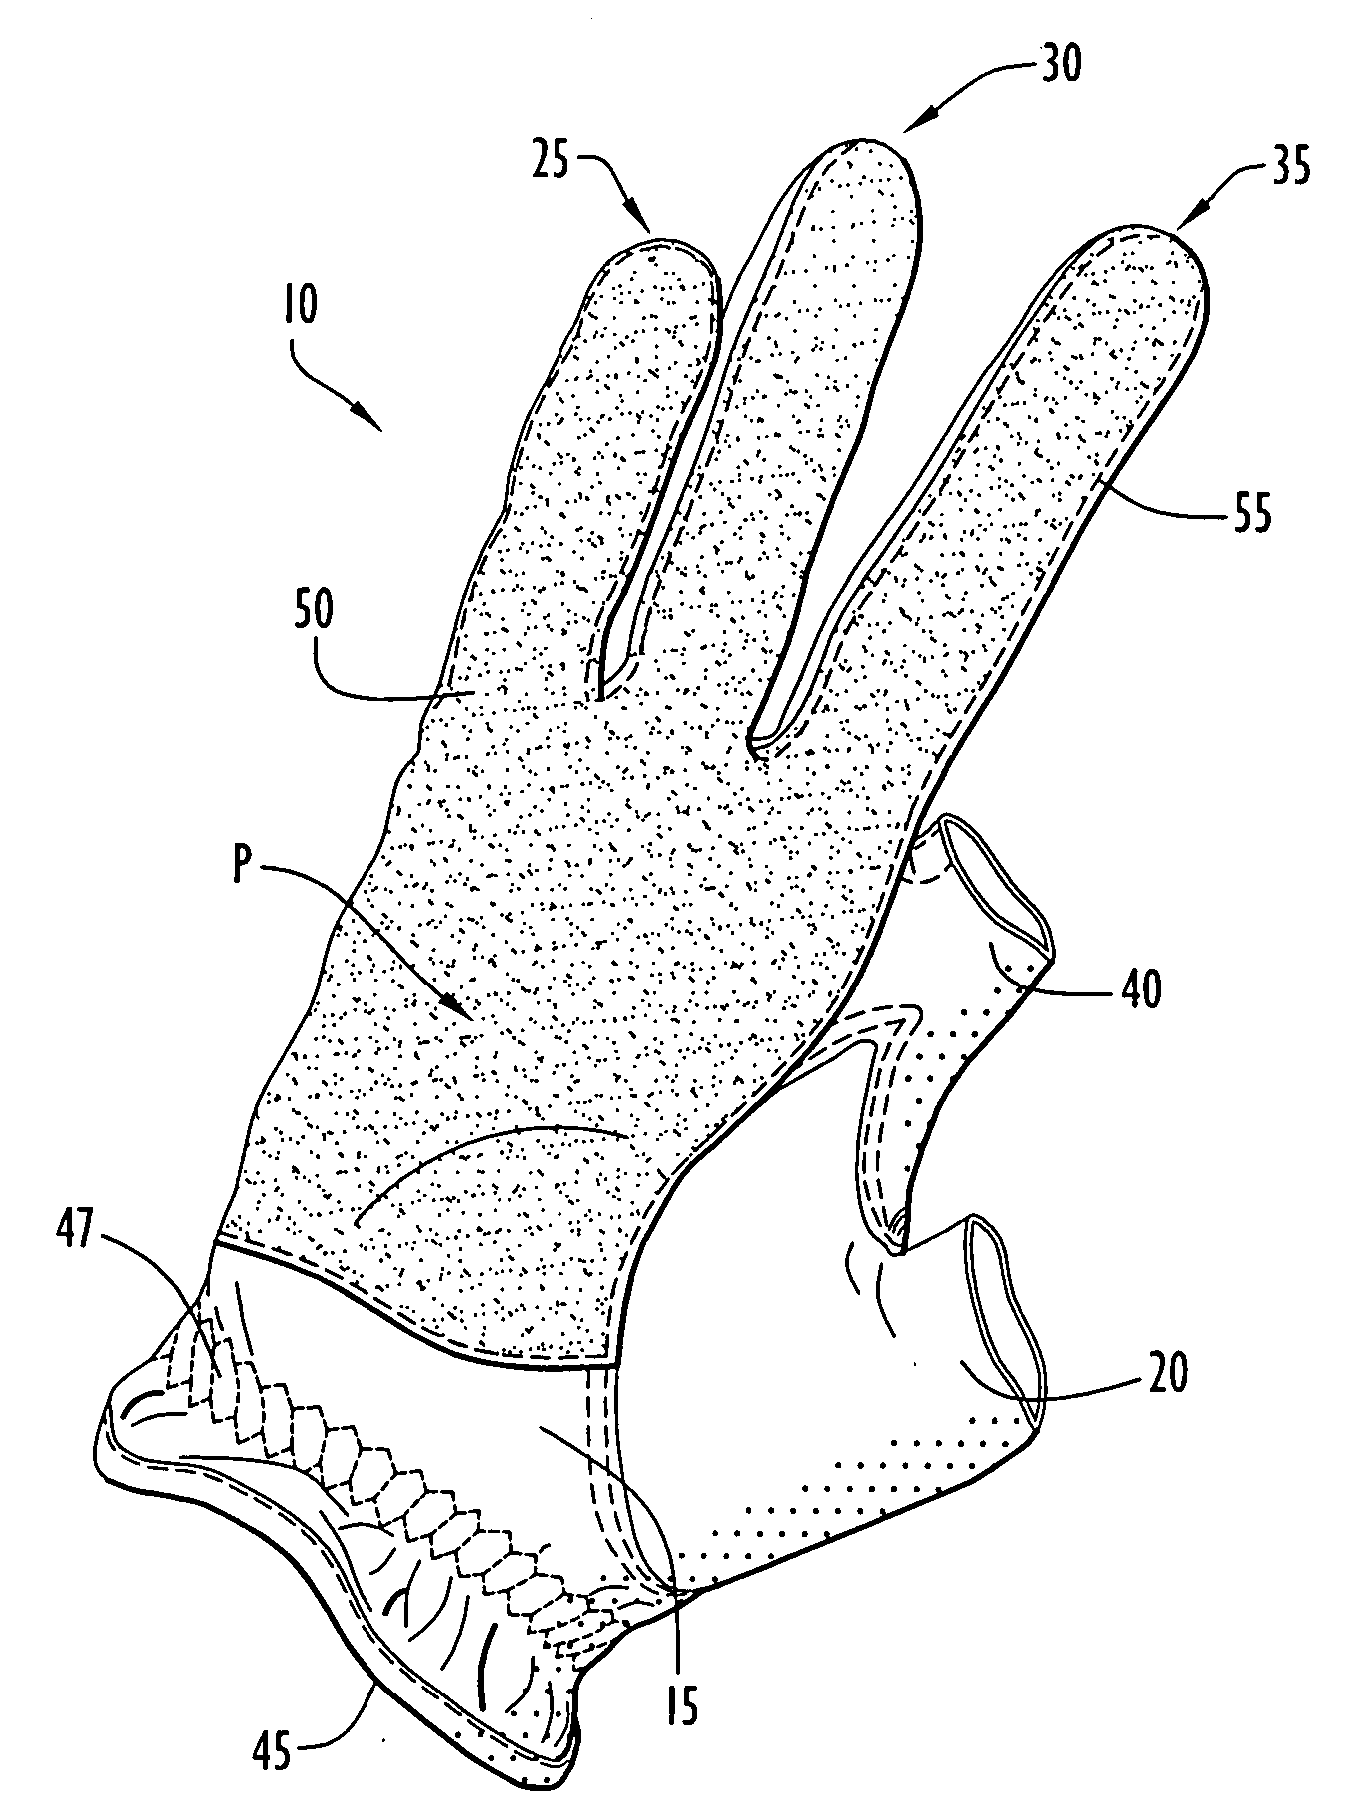 Glove for dry erase surfaces and method of erasure